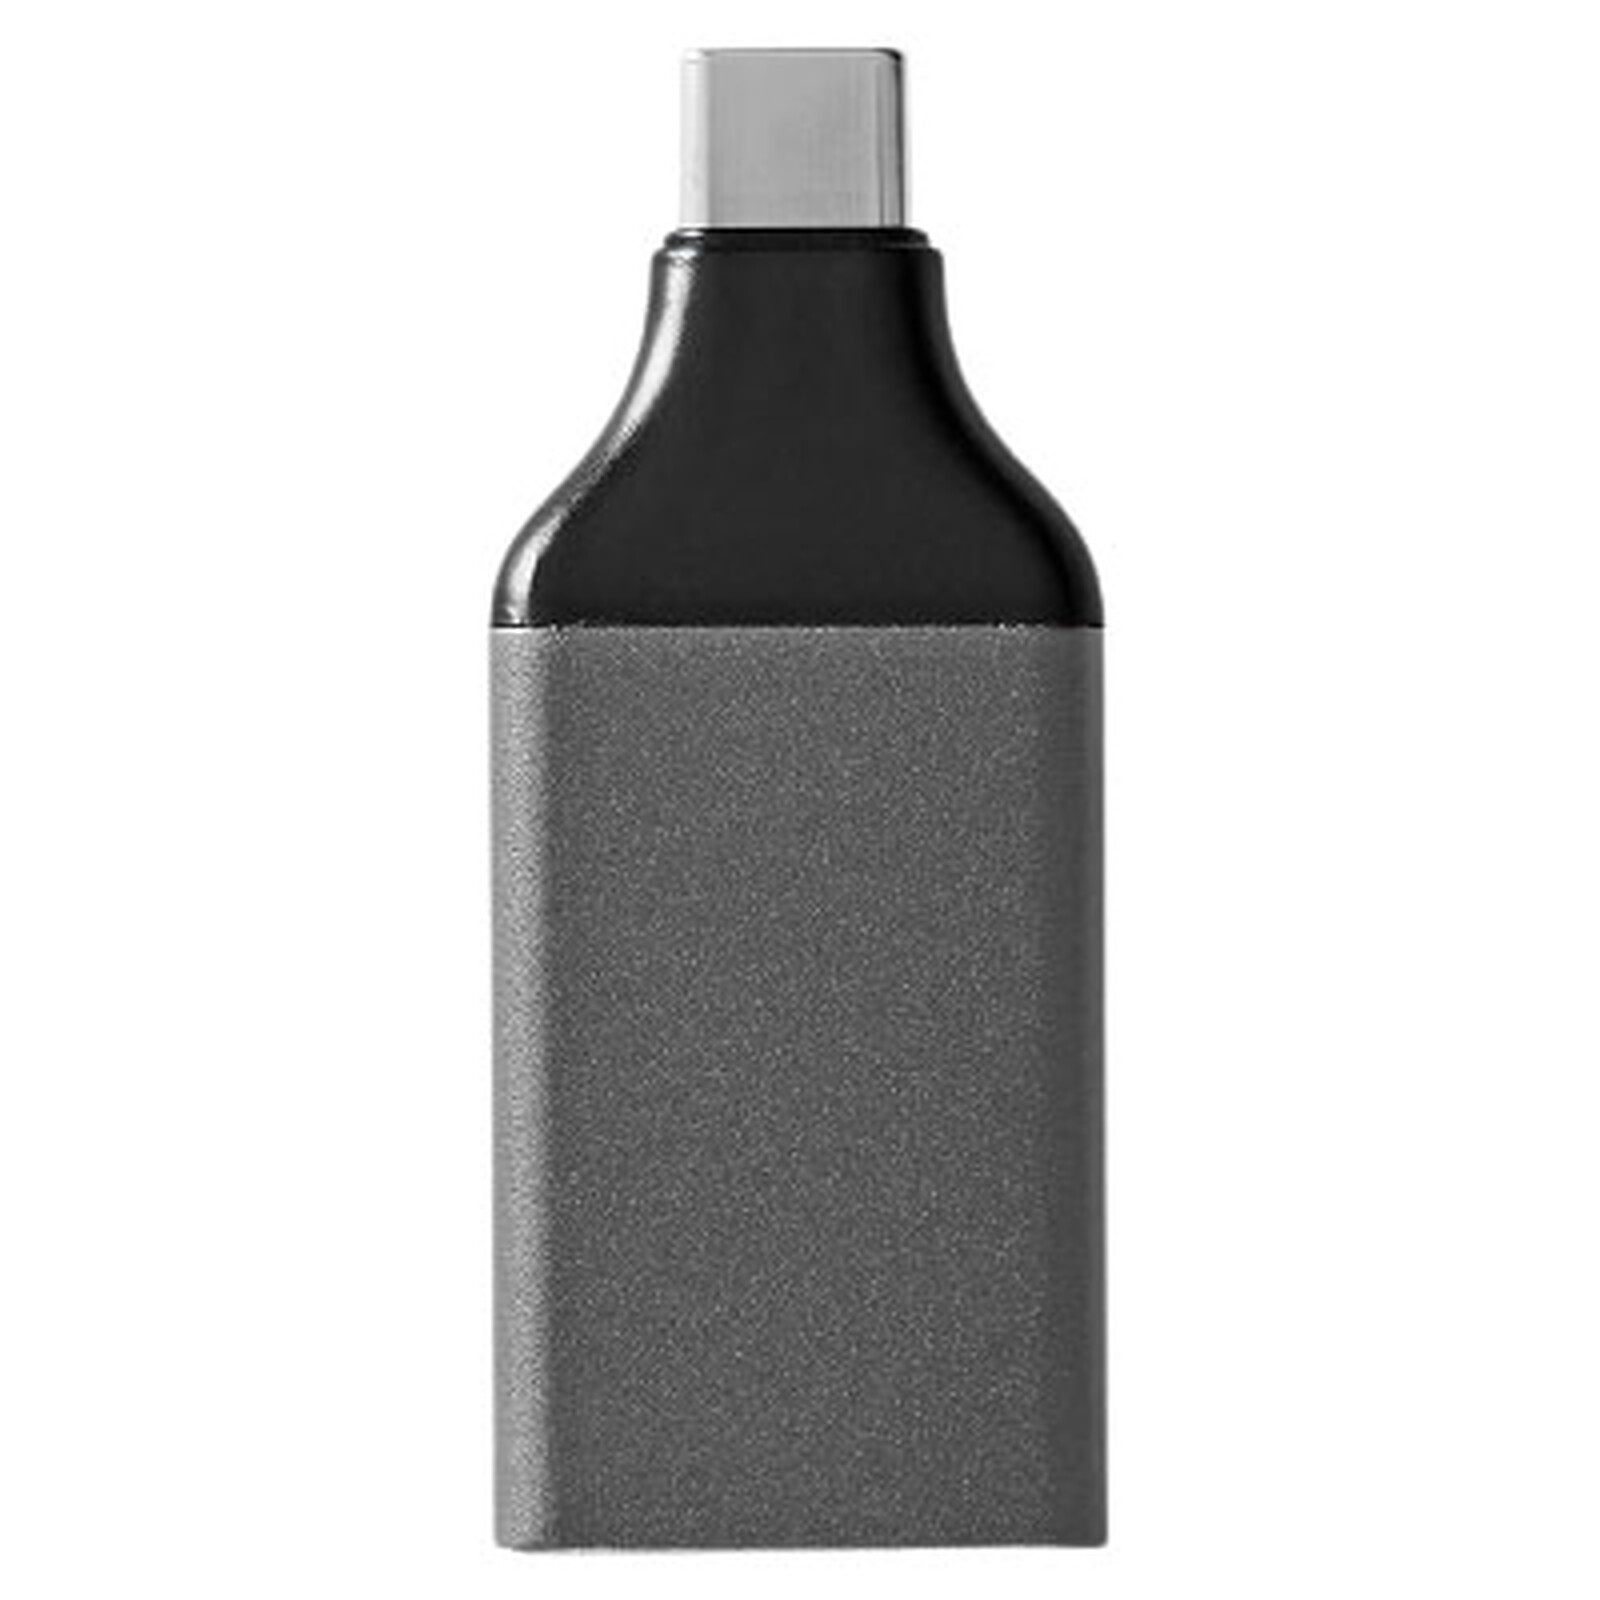 Corkcicle - Canteen - Thermos Wine Bottle - Black - 1.8 Liter (60